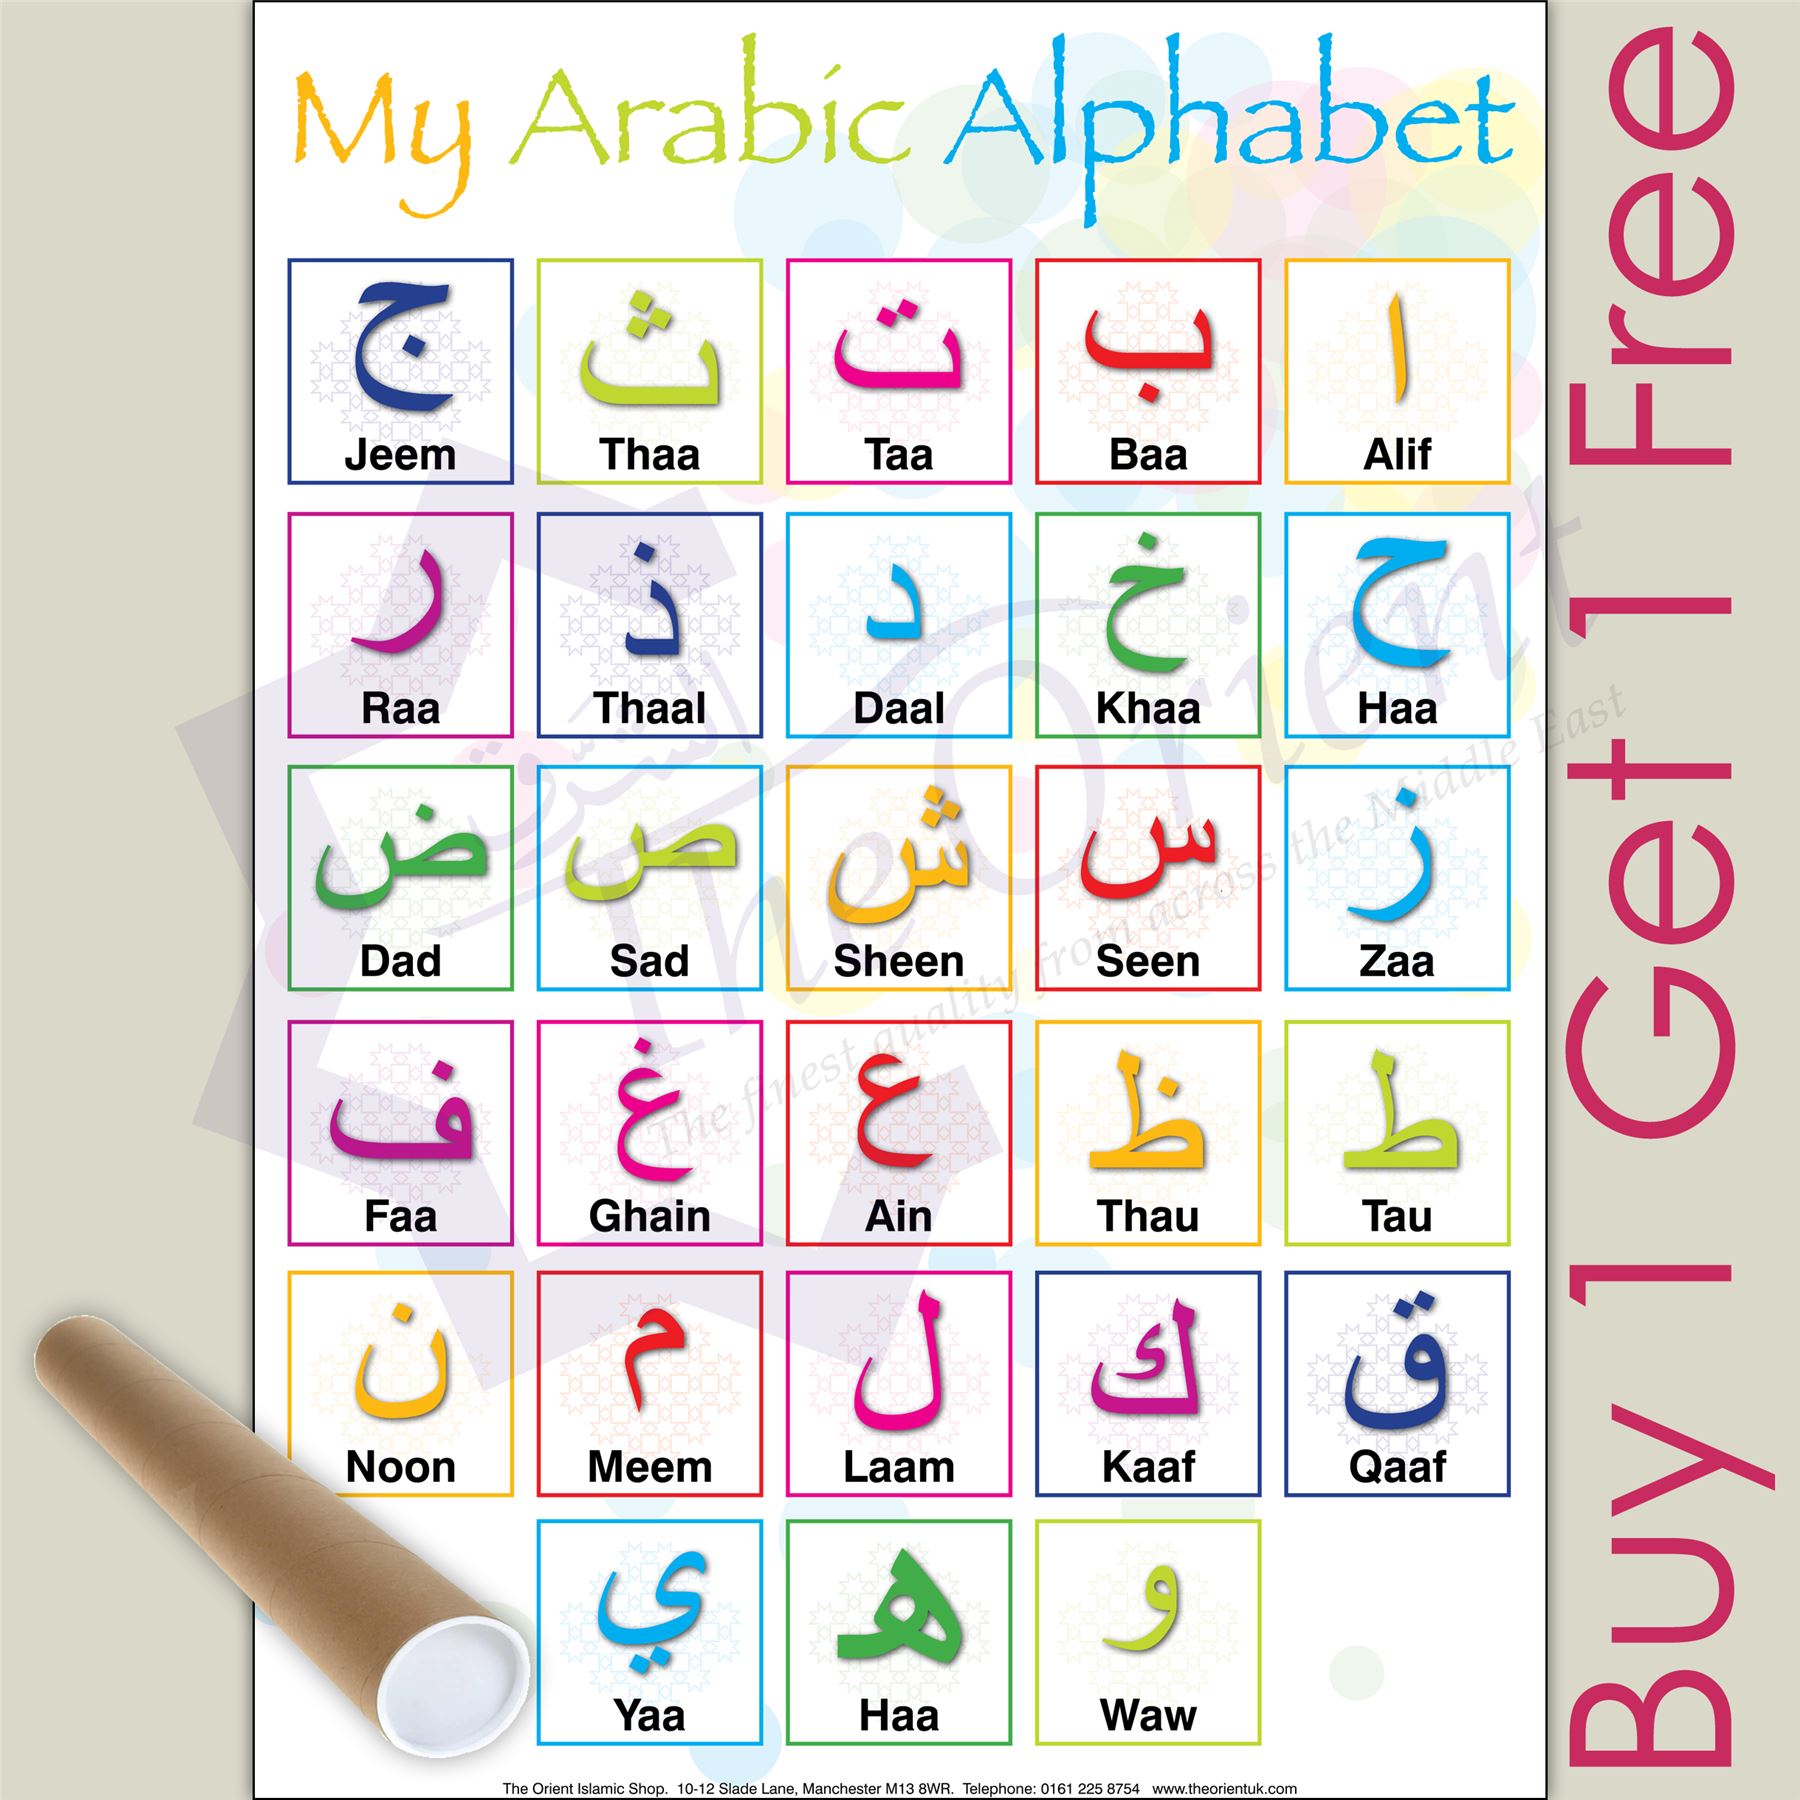 typing in arabic letters